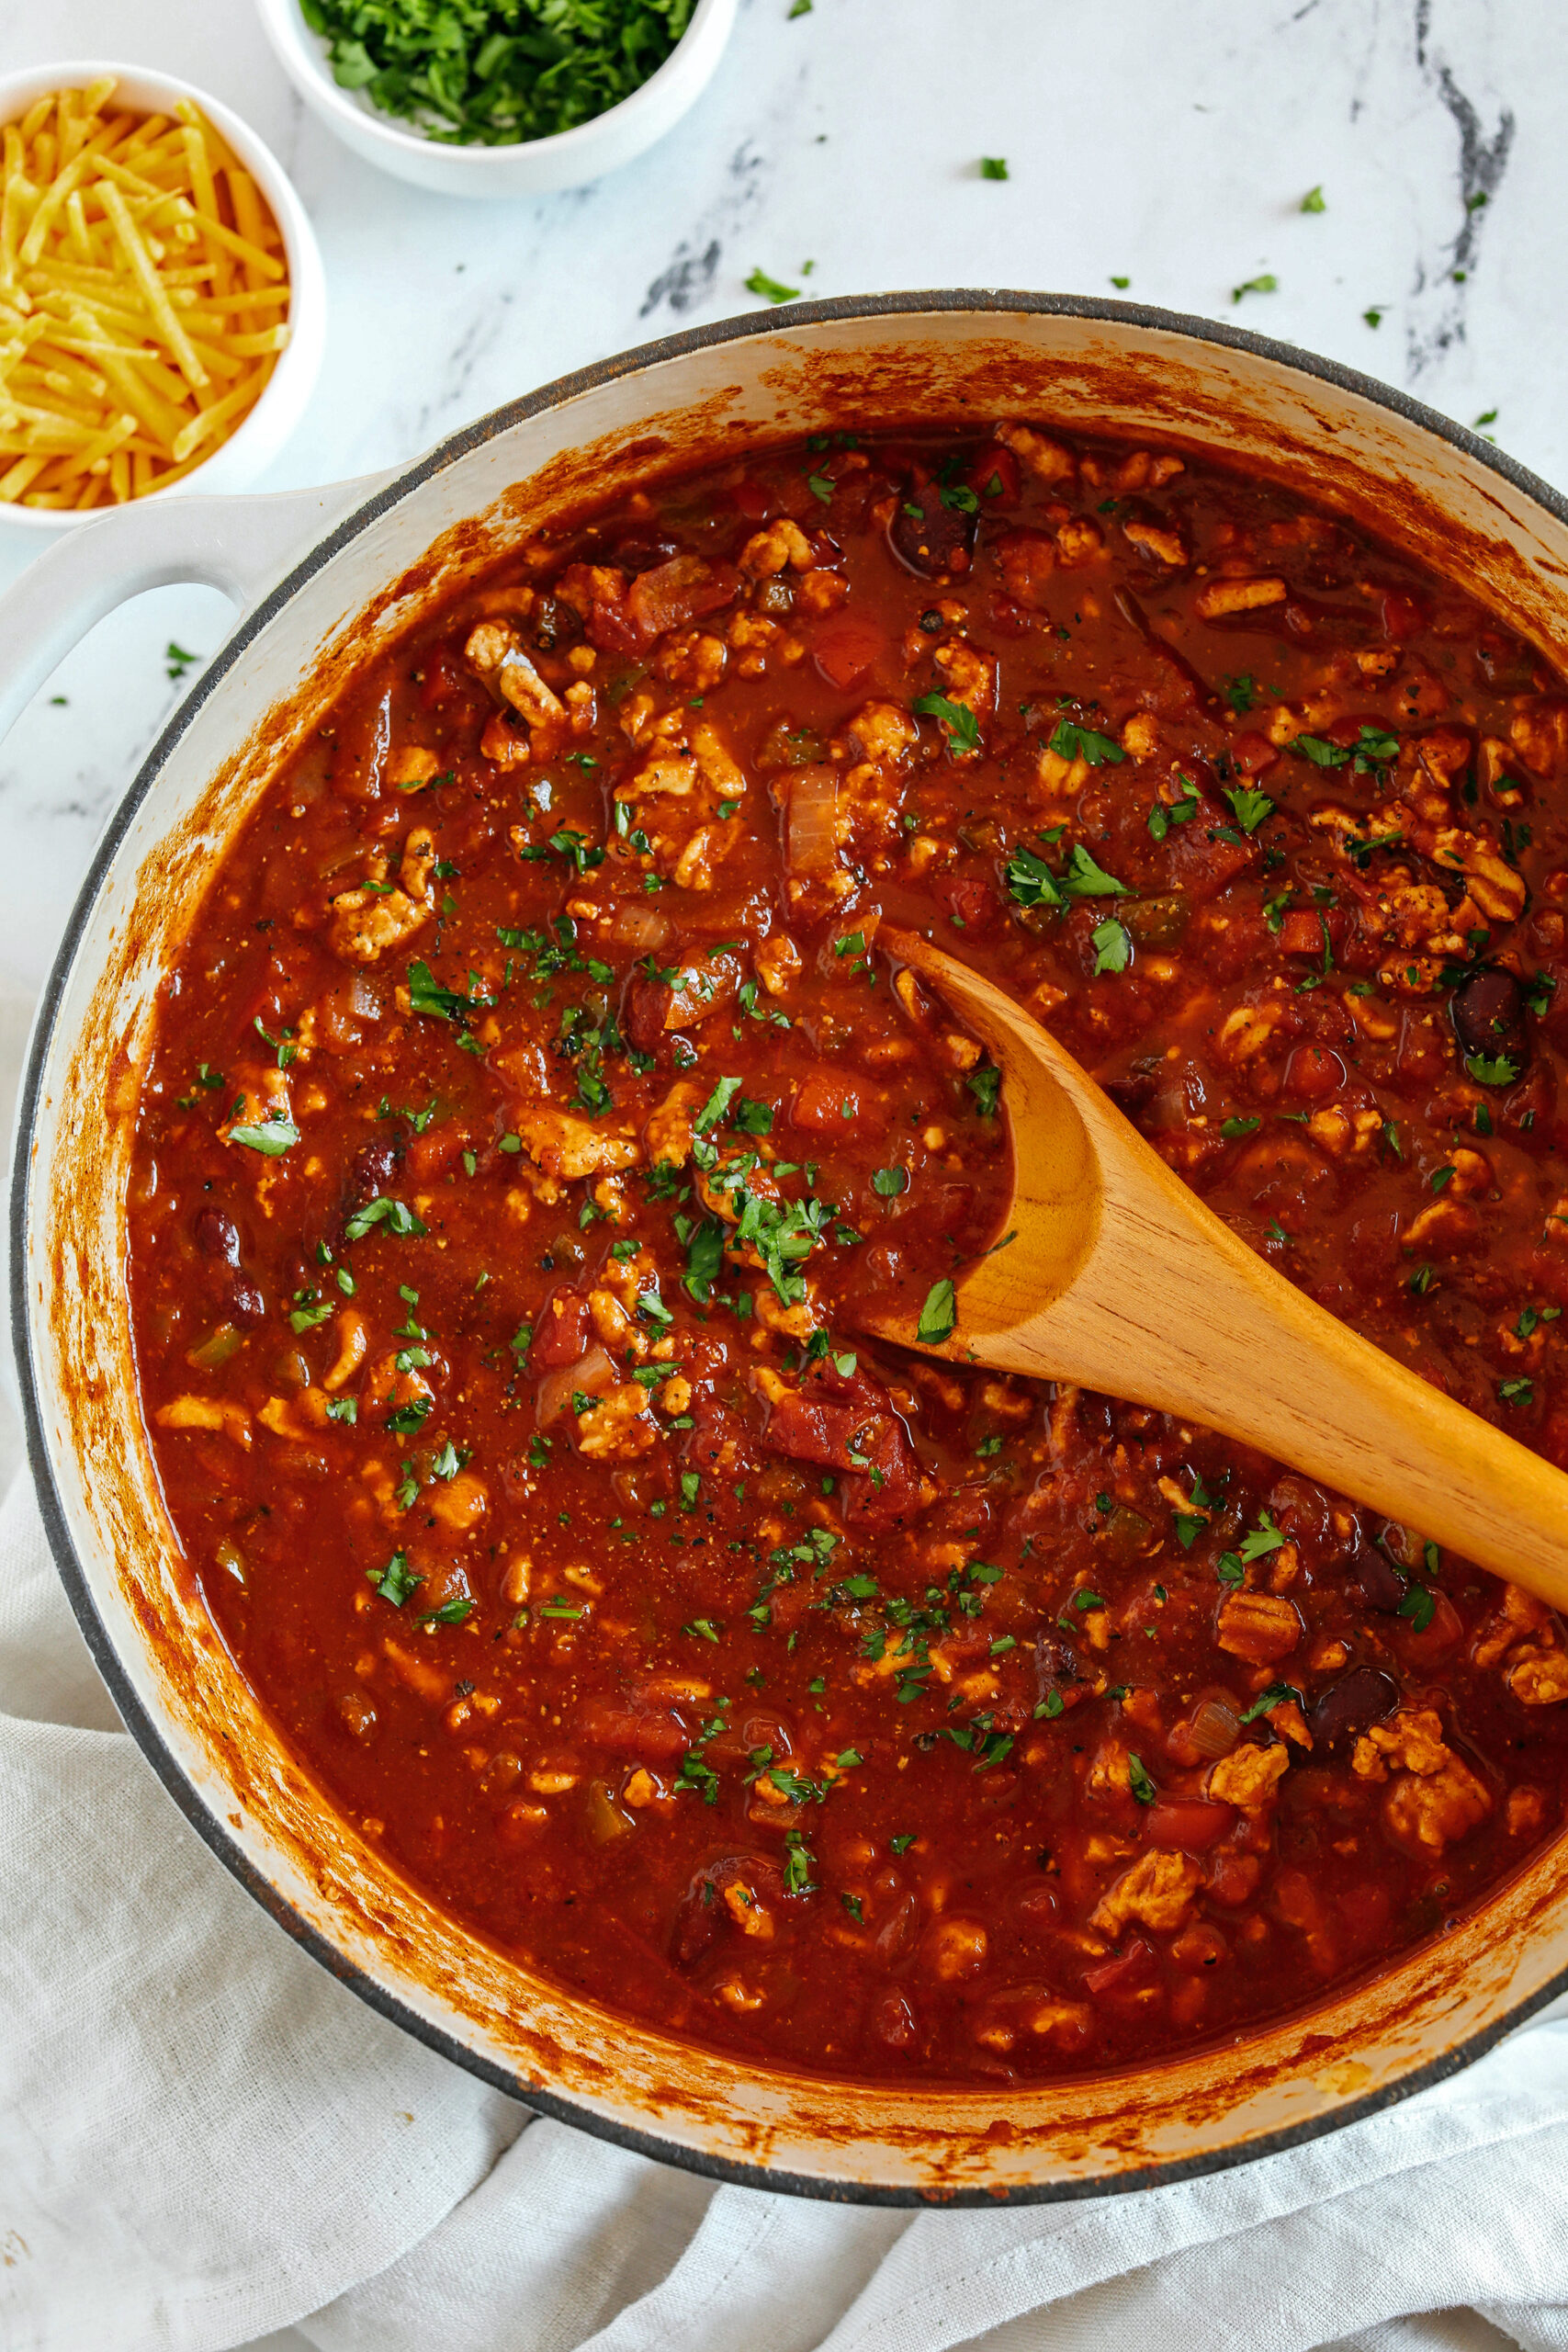 The BEST Healthy Turkey Chili recipe full of fresh veggies, lean ground turkey and loaded with flavor!  The perfect cozy chili you can easily make in our instant pot, crock pot or right on the stove!